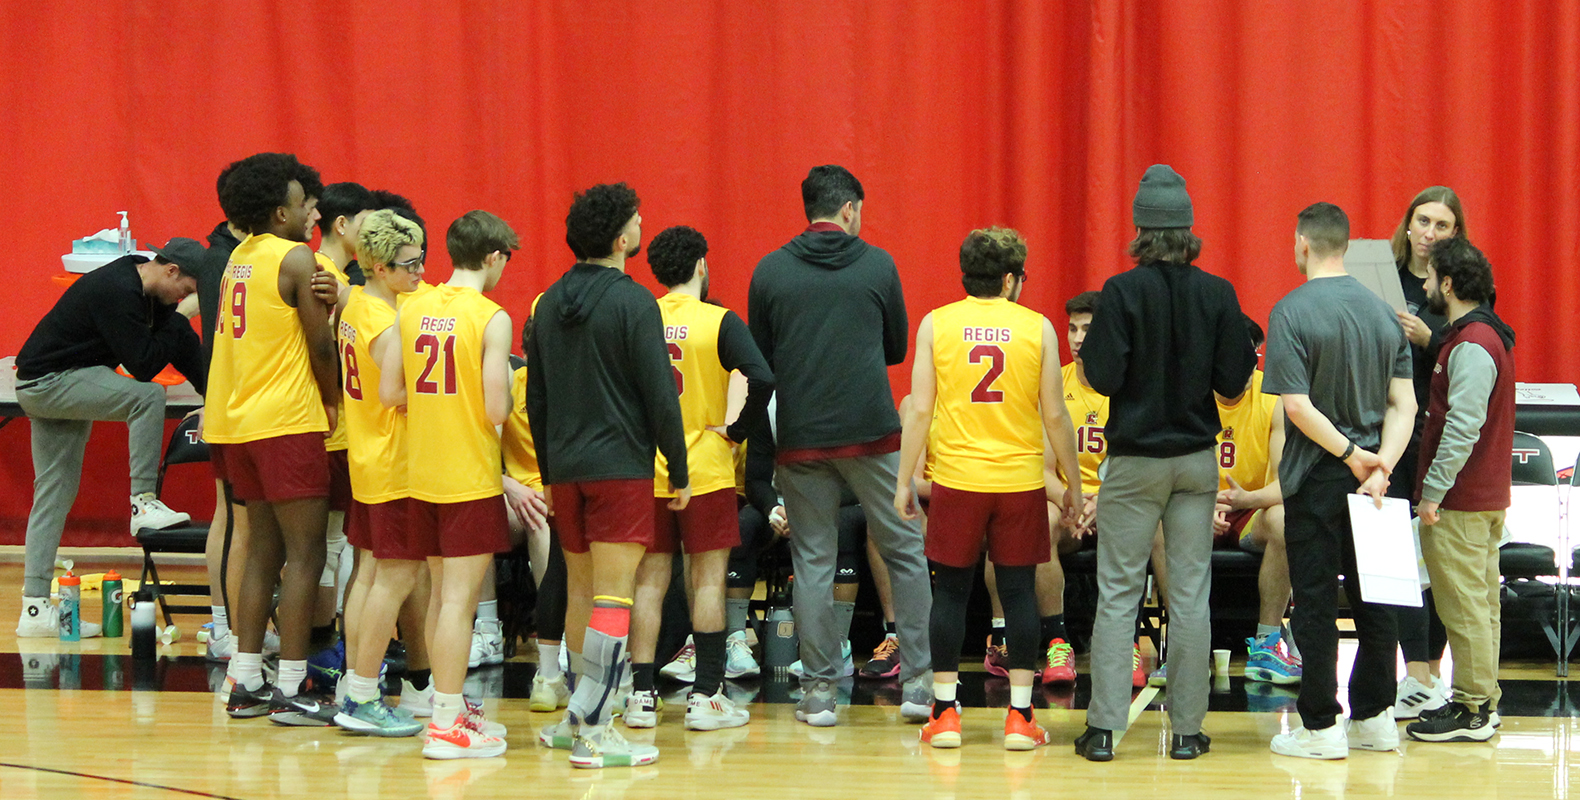 Pride Men’s Volleyball Loses at Rivier